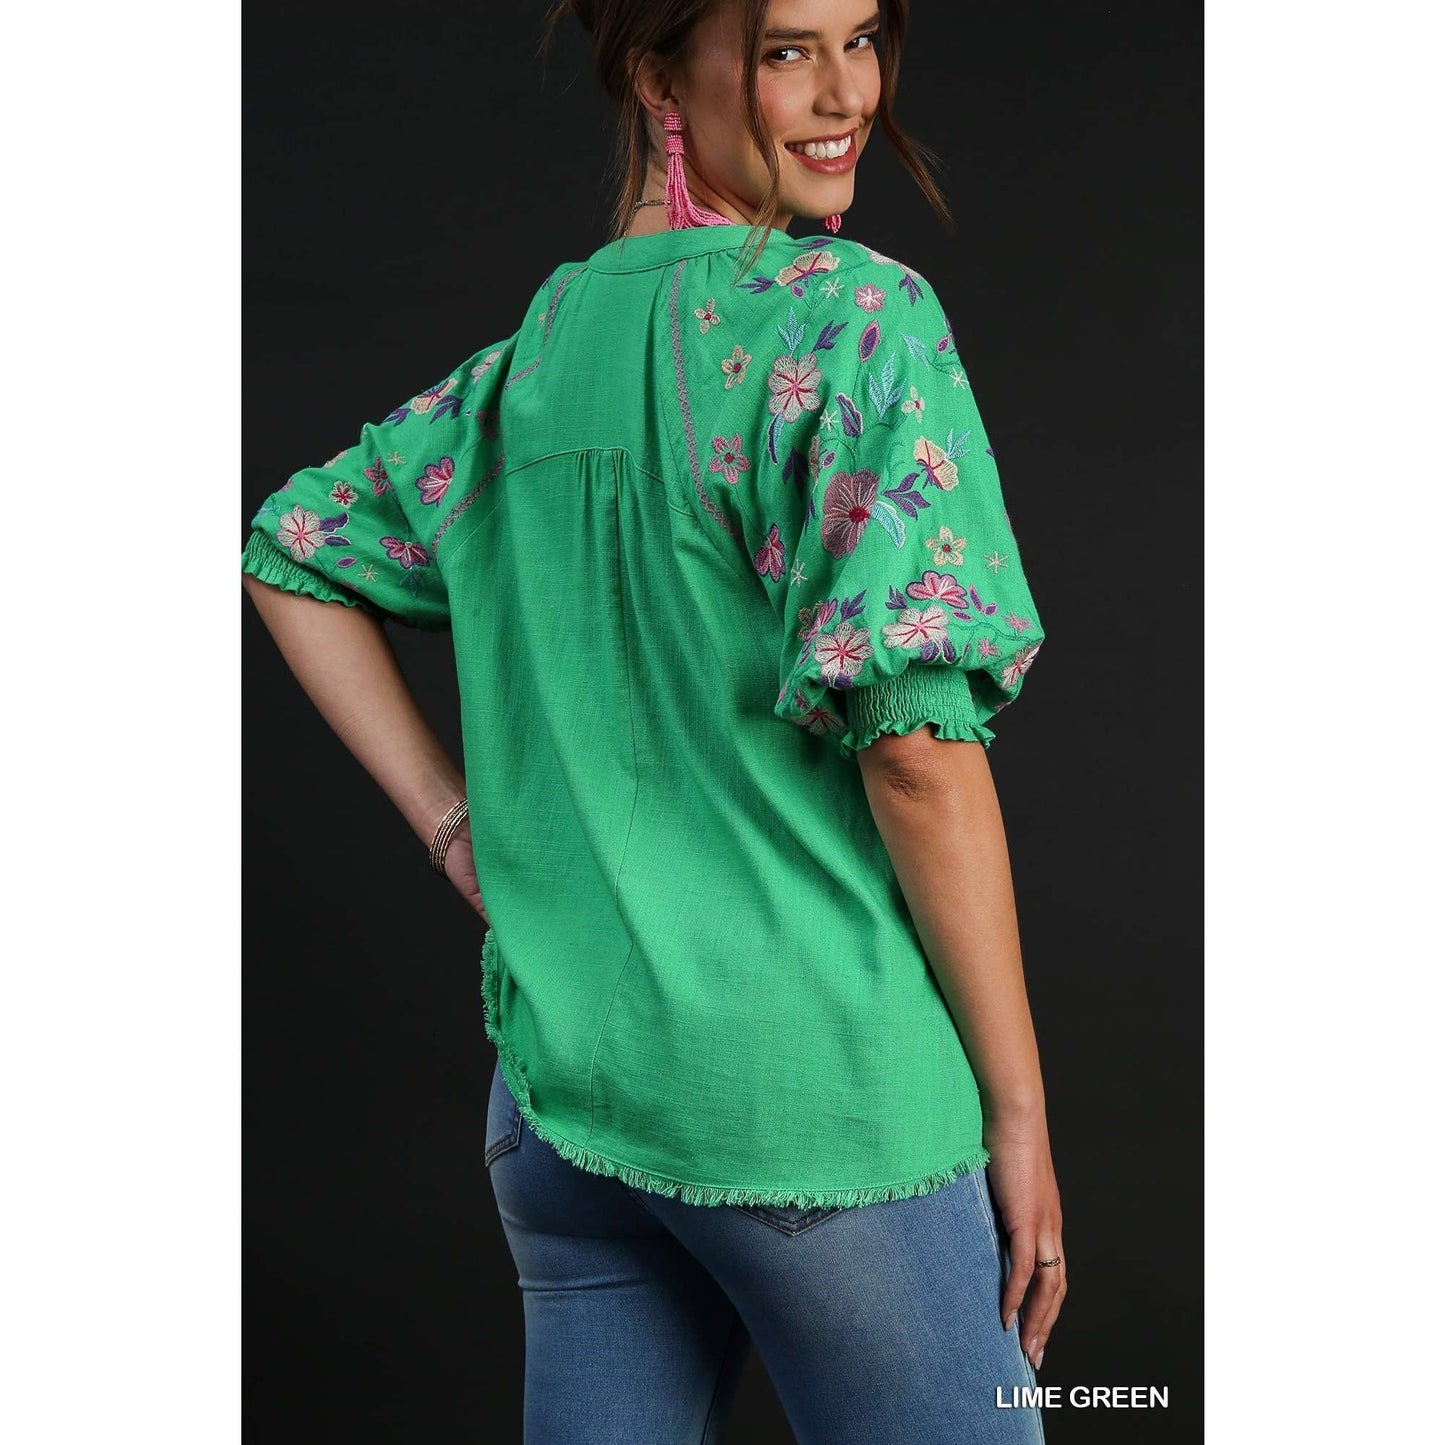 Lime Green Linen Split Neck Mid Button Down Top Spring-Summer STYLE USA